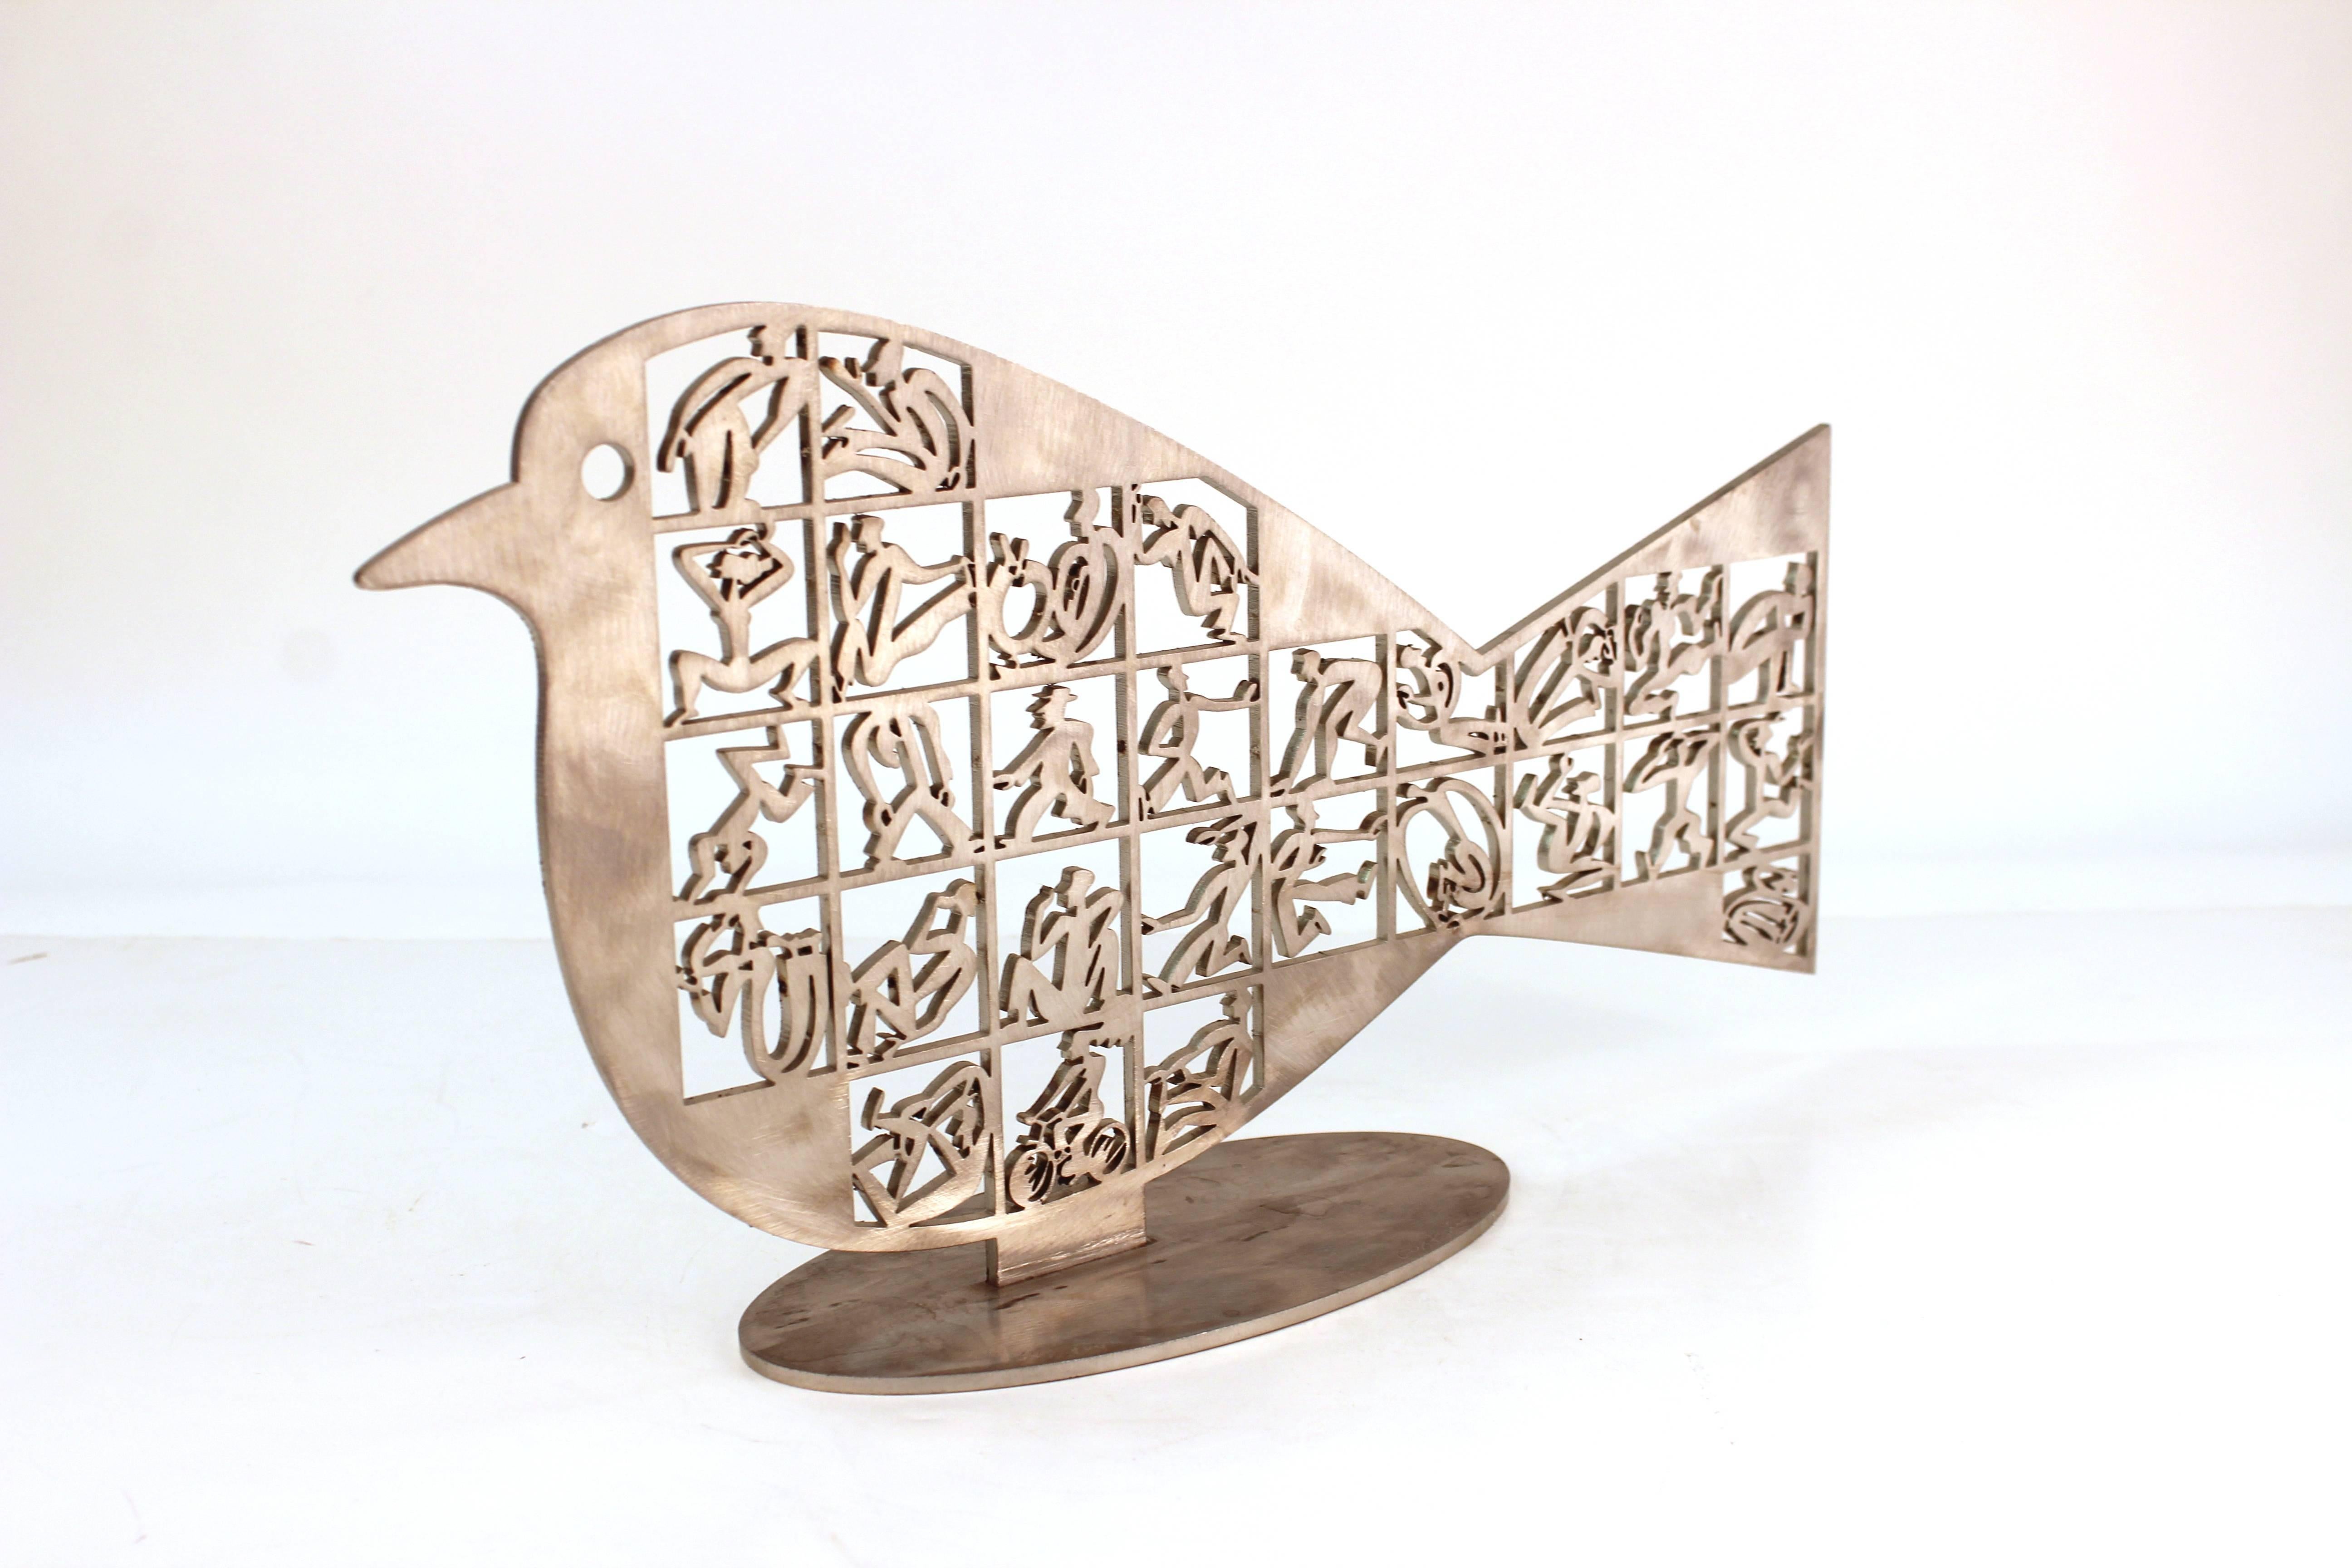 A welded and cut metal sculpture by David Gerstein, titled 'Soul Bird'. The piece is signed and numbered on the base and is in very good condition.